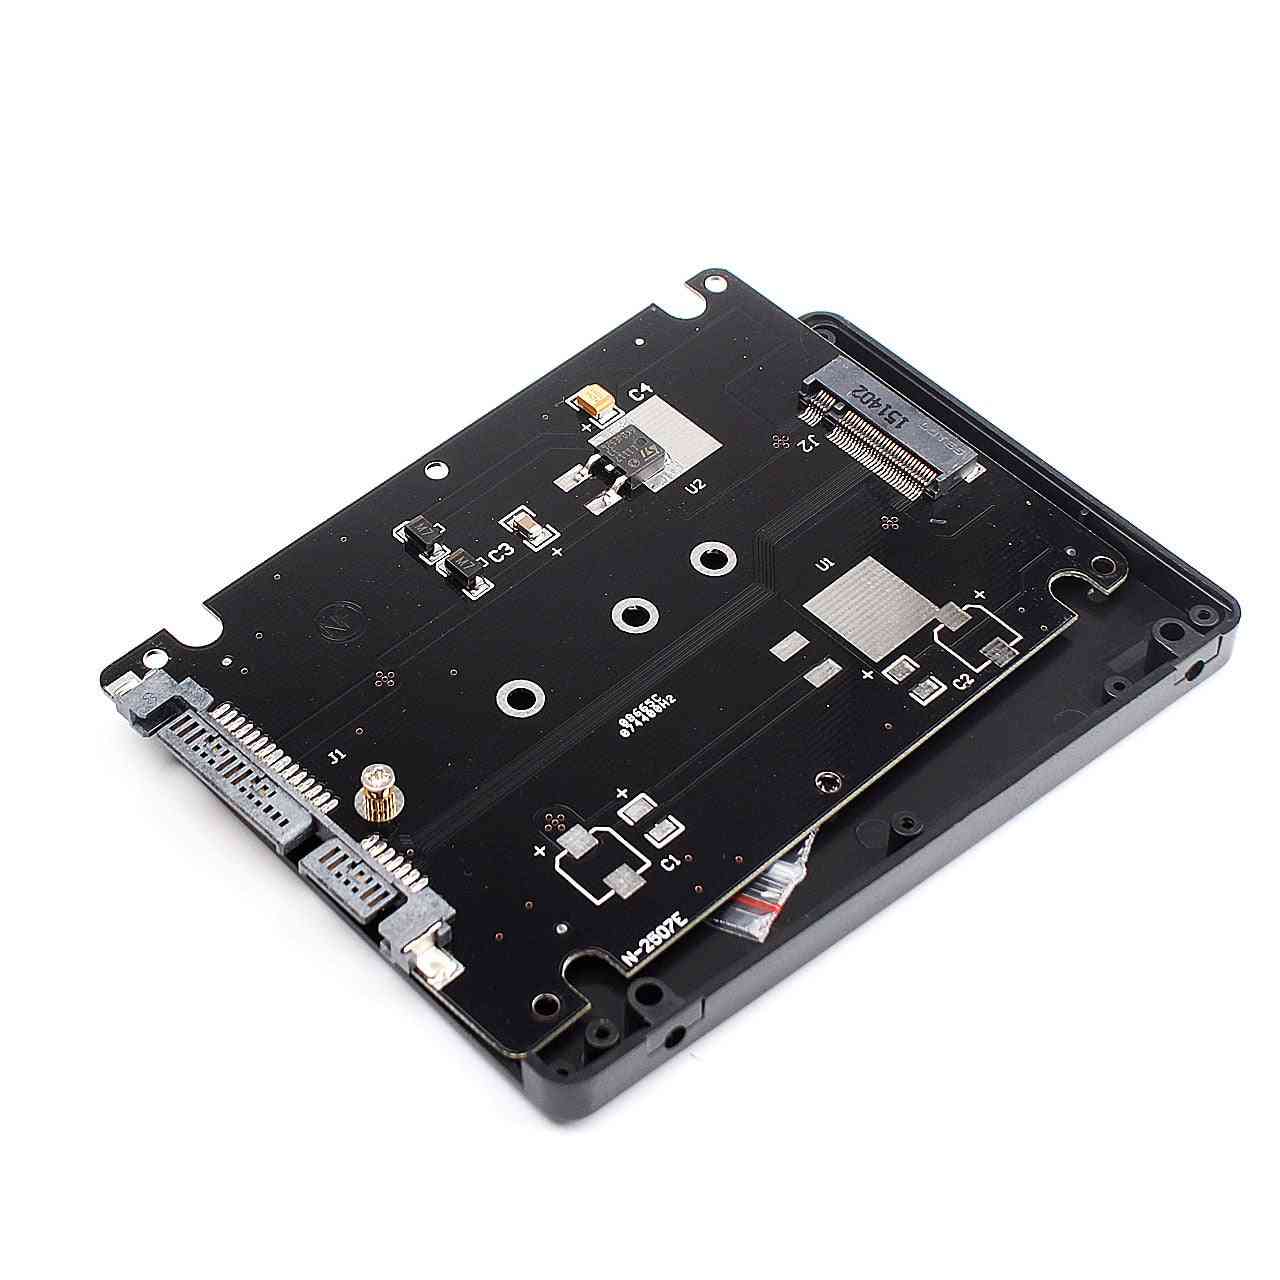 B+m Key Socket, 2 M.2 Ngff- Ssd To 2.5 Sata Adapter Card With Case